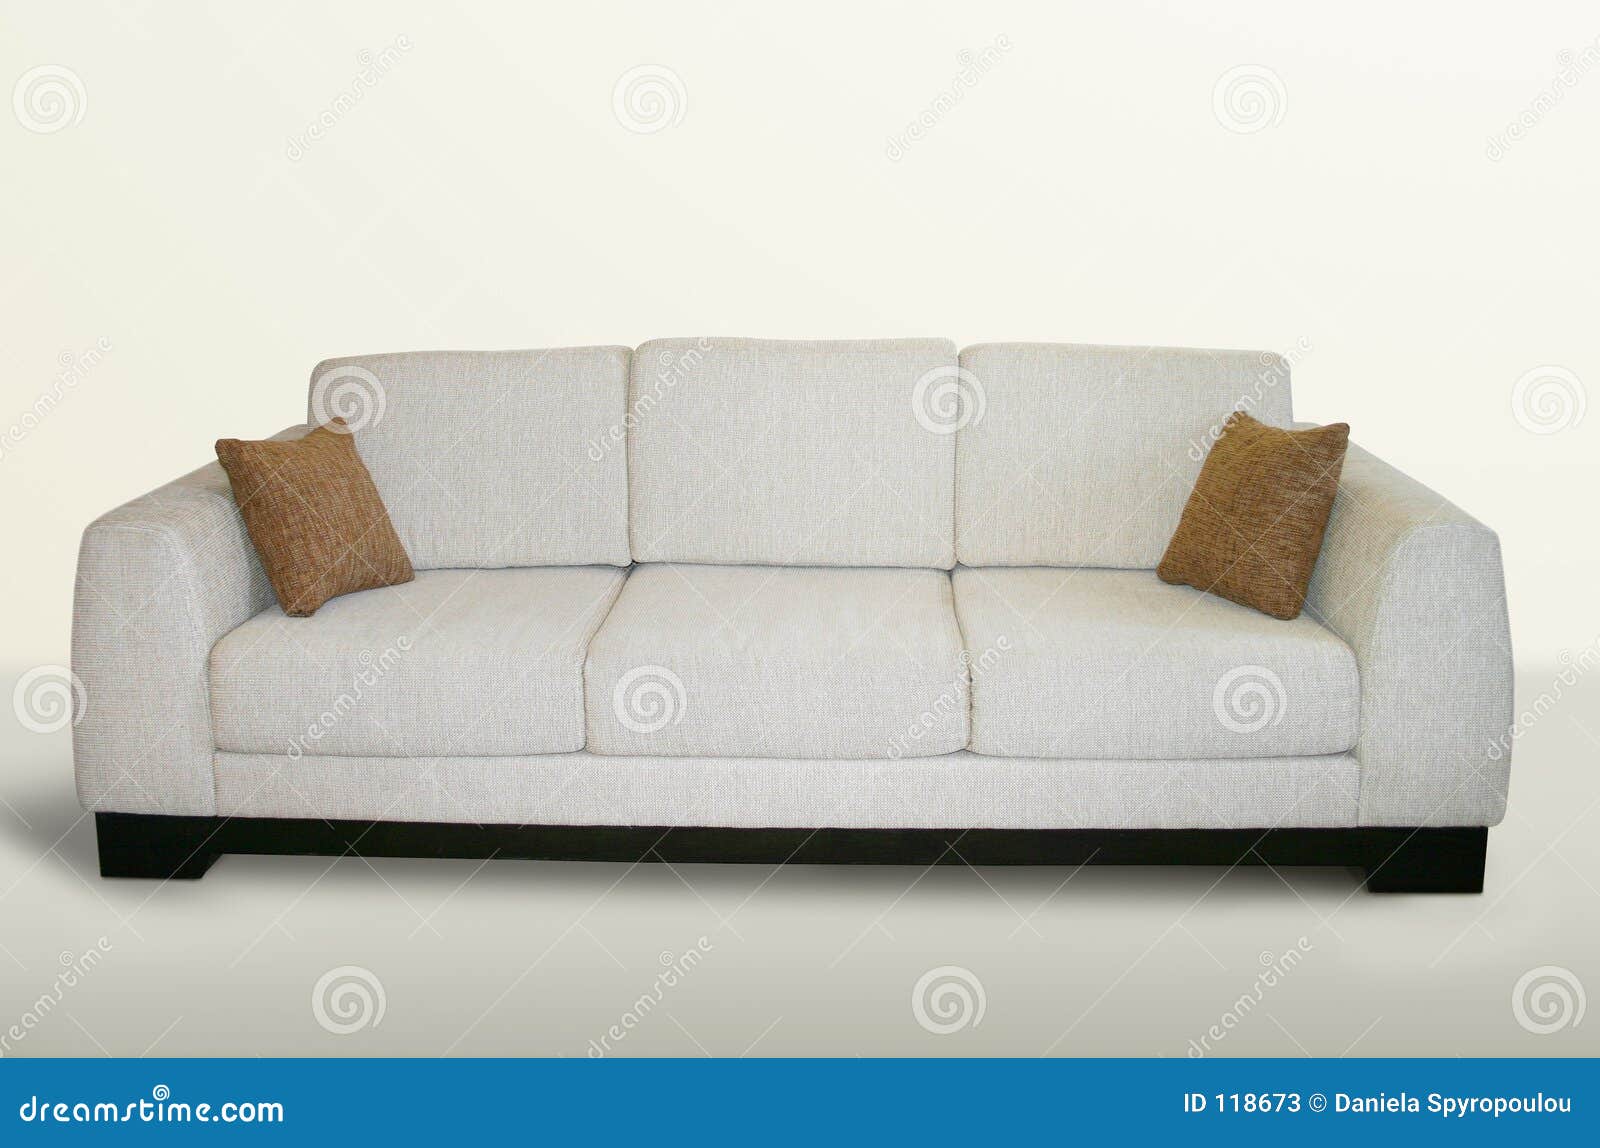  couch